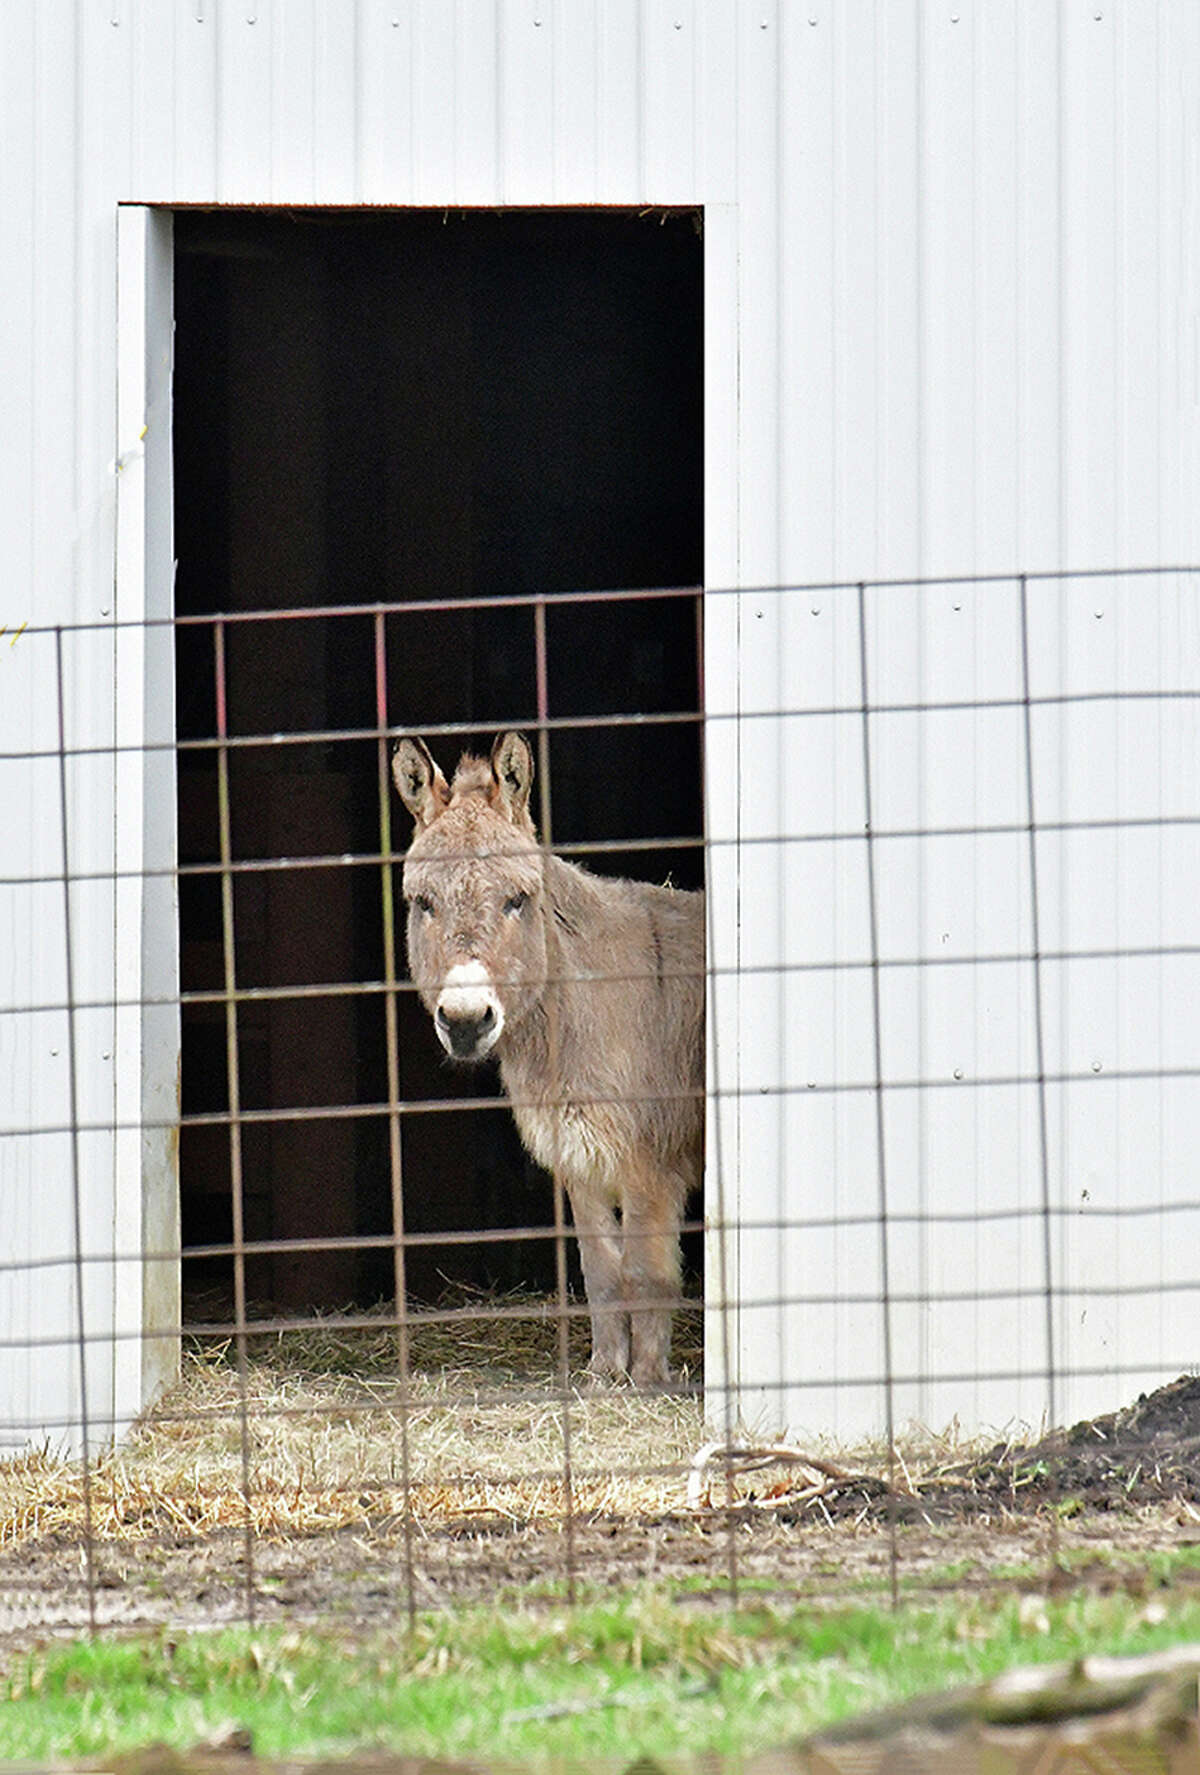 A donkey gives a curious look from inside a barn.